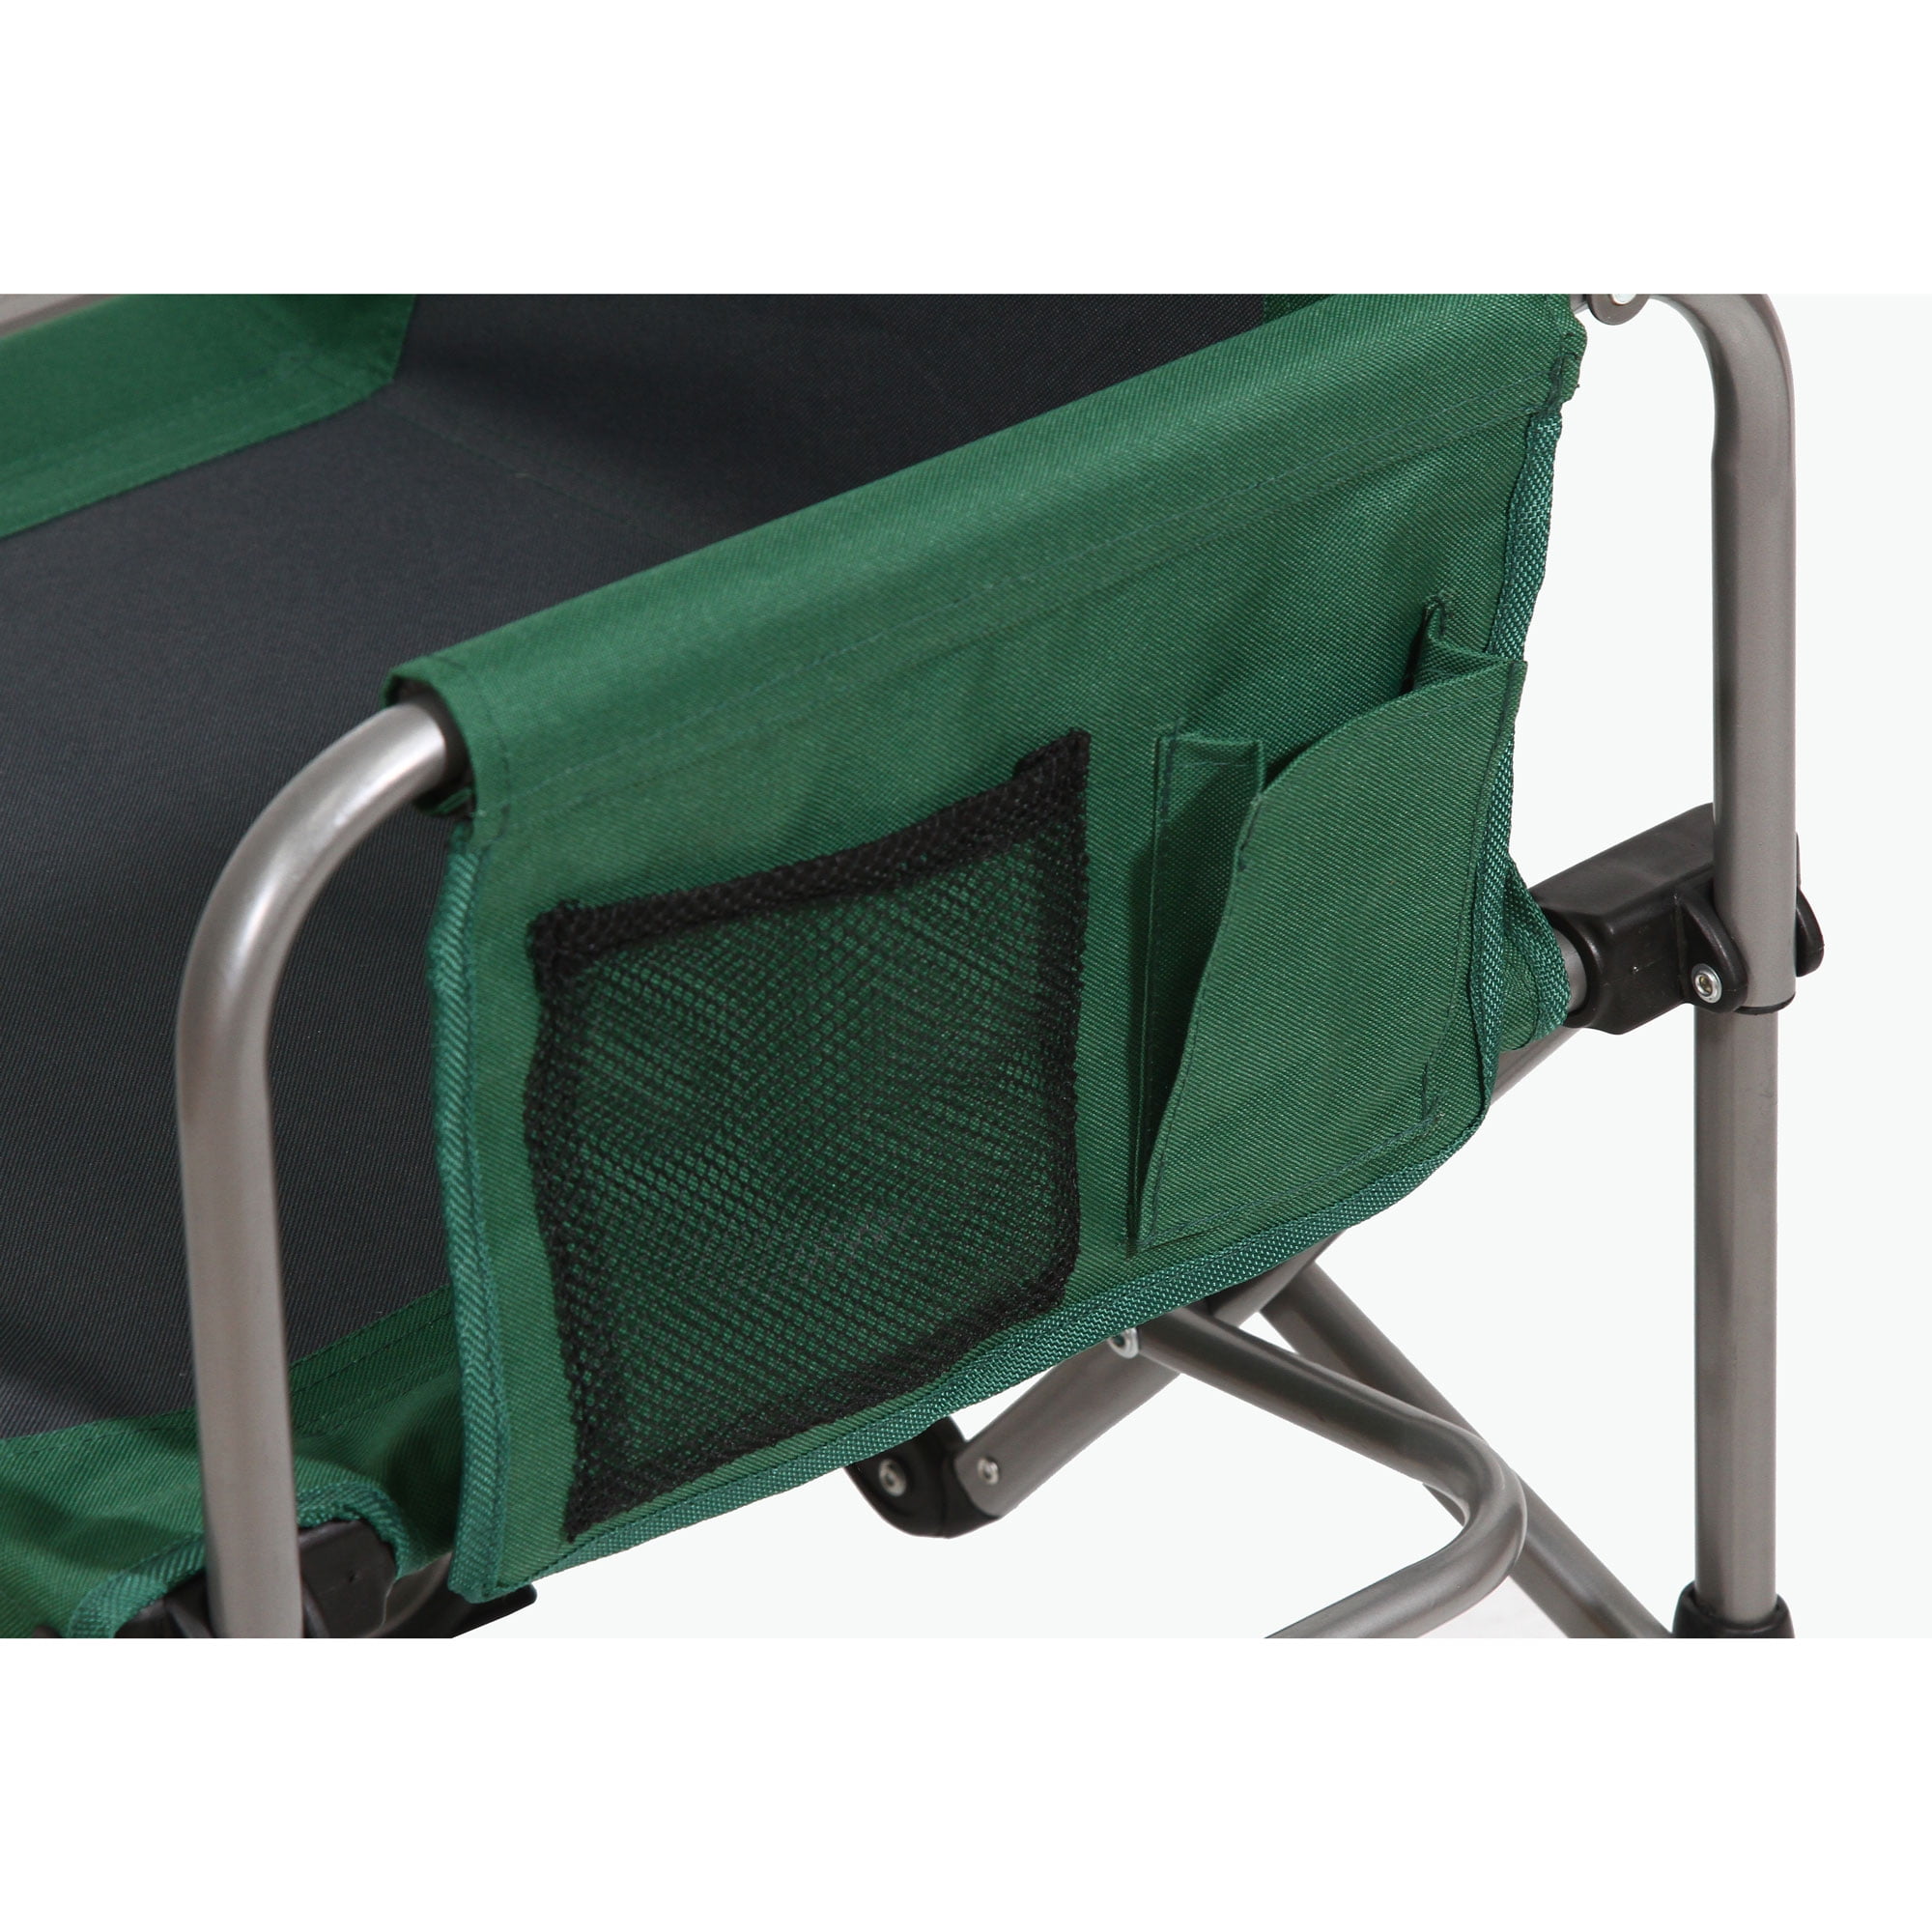 Kamp-Rite Compact Director's Chair w/Side Table & Organizer, Green (2)